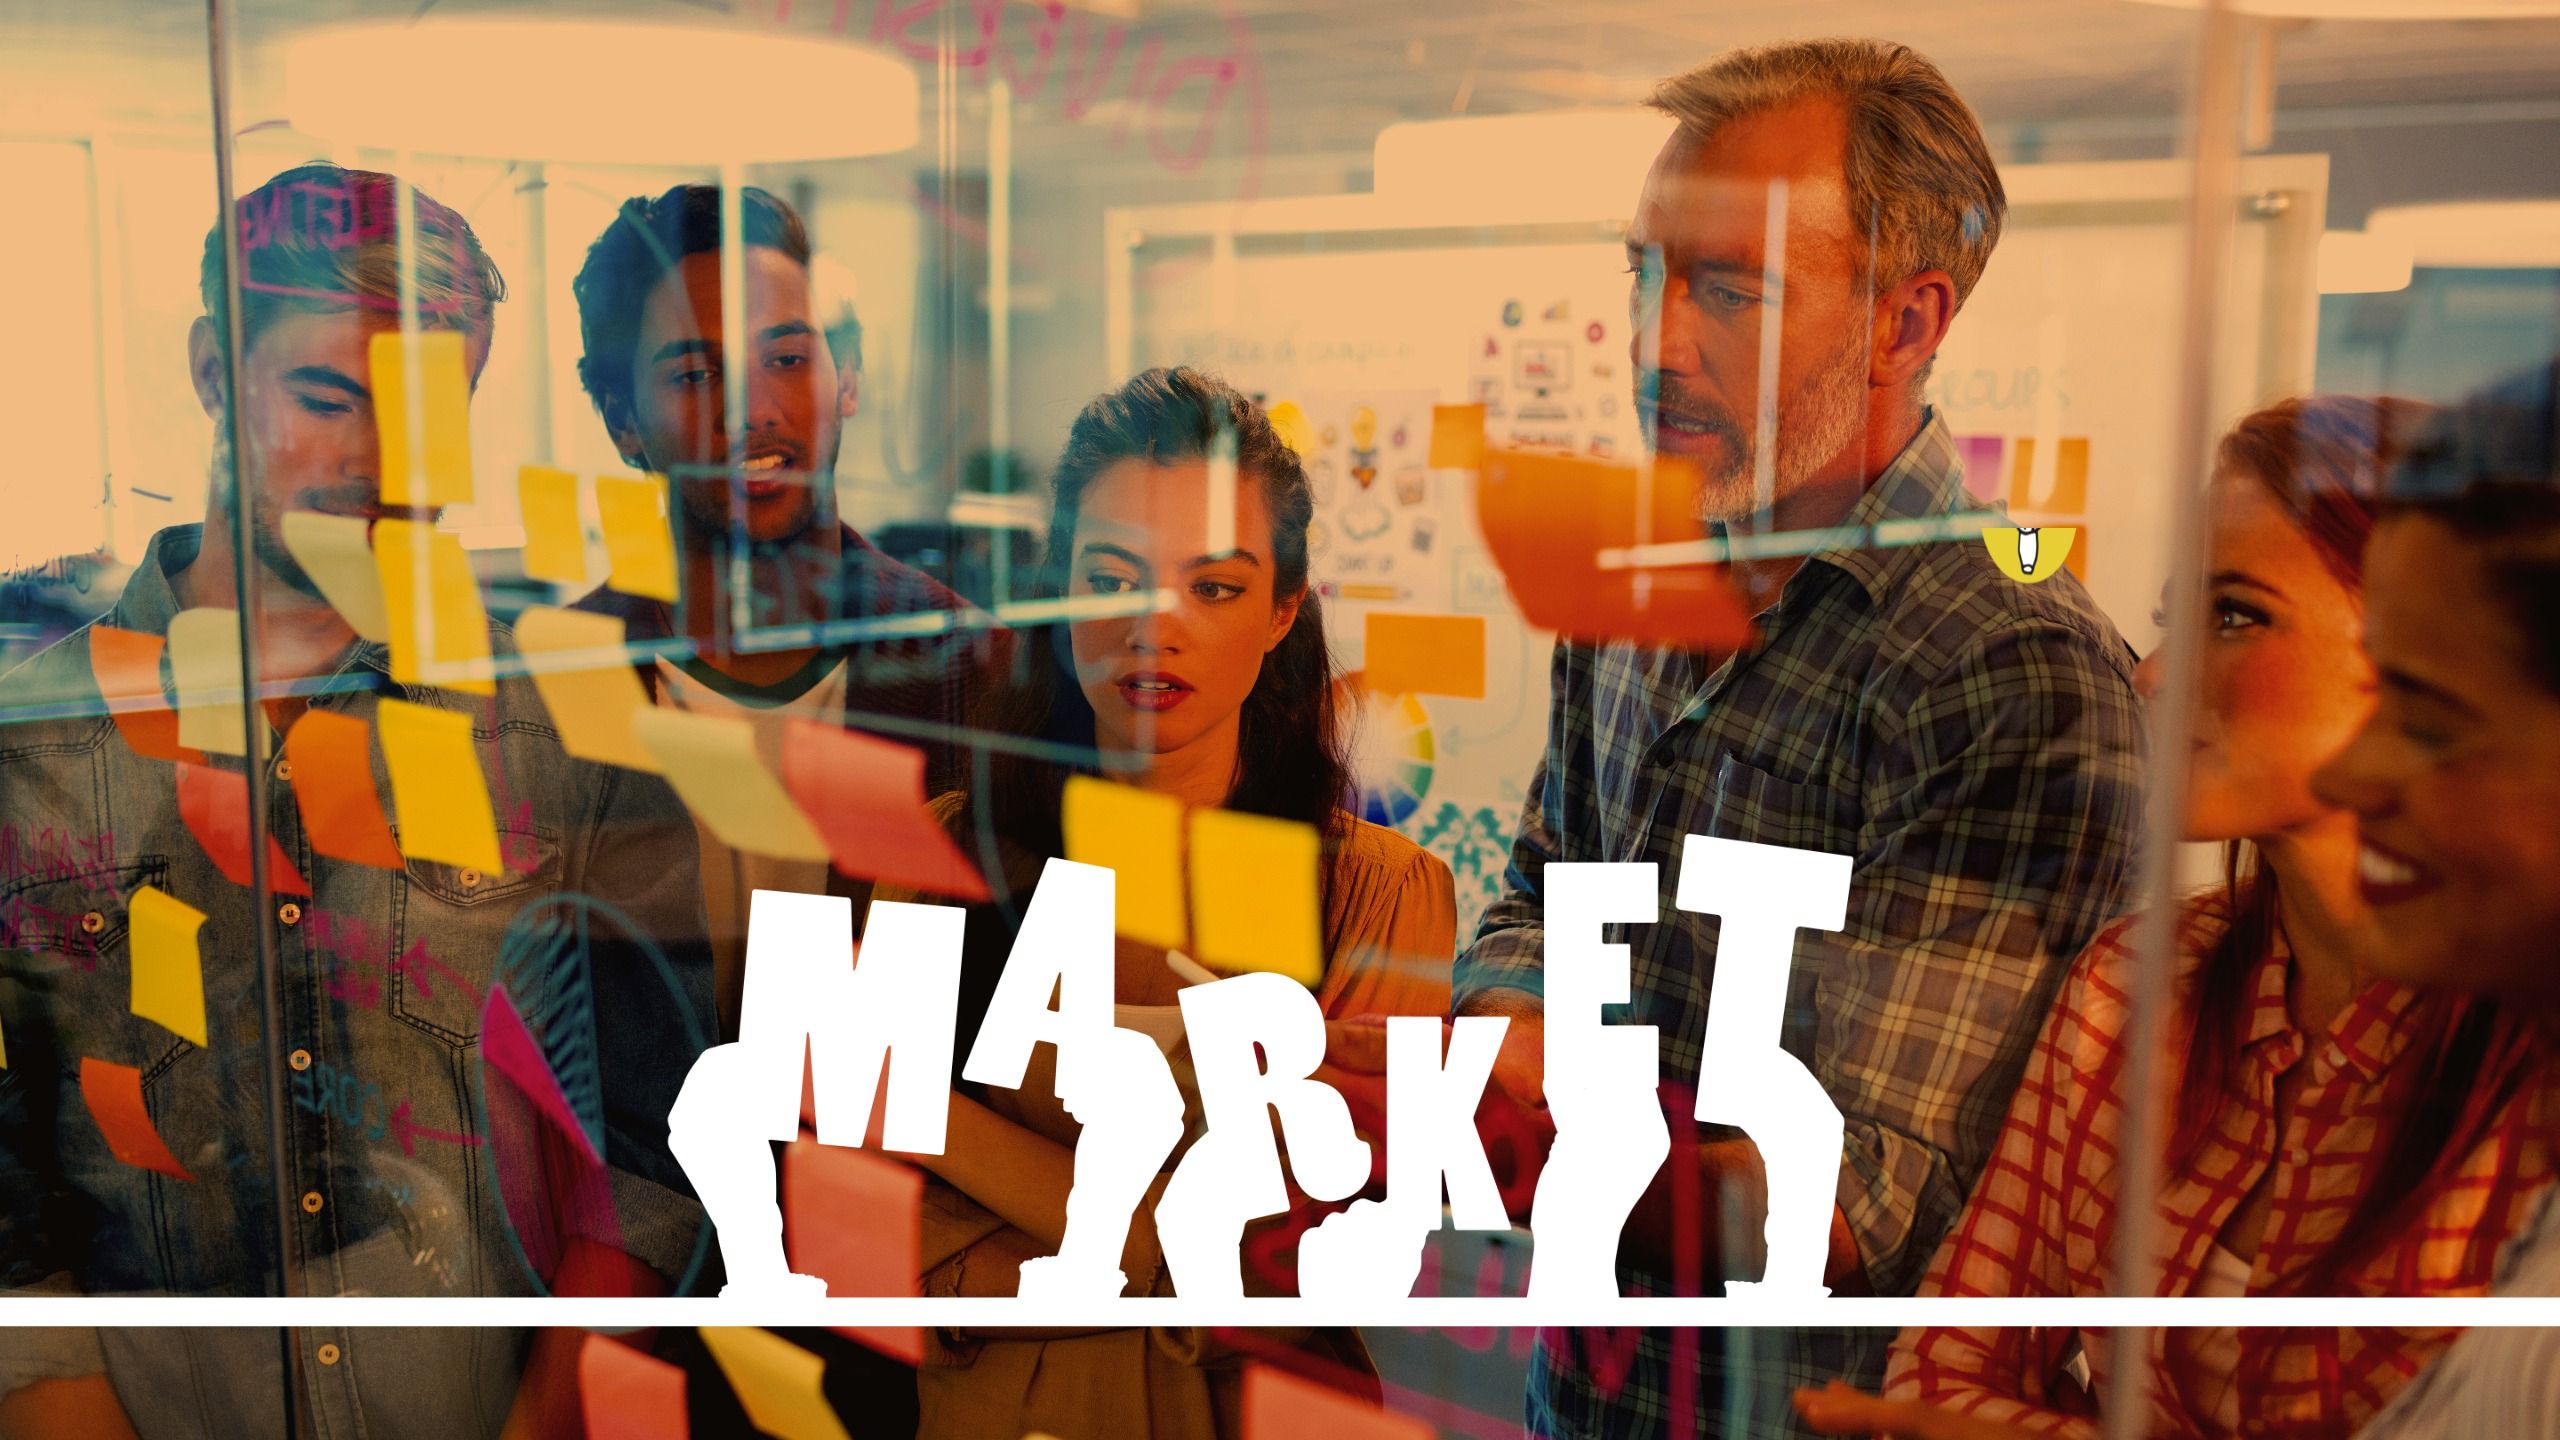 Illustration of the word market against a background of a maketing team brainstorming ideas behind a glass wall - Product position: why is it important - Image